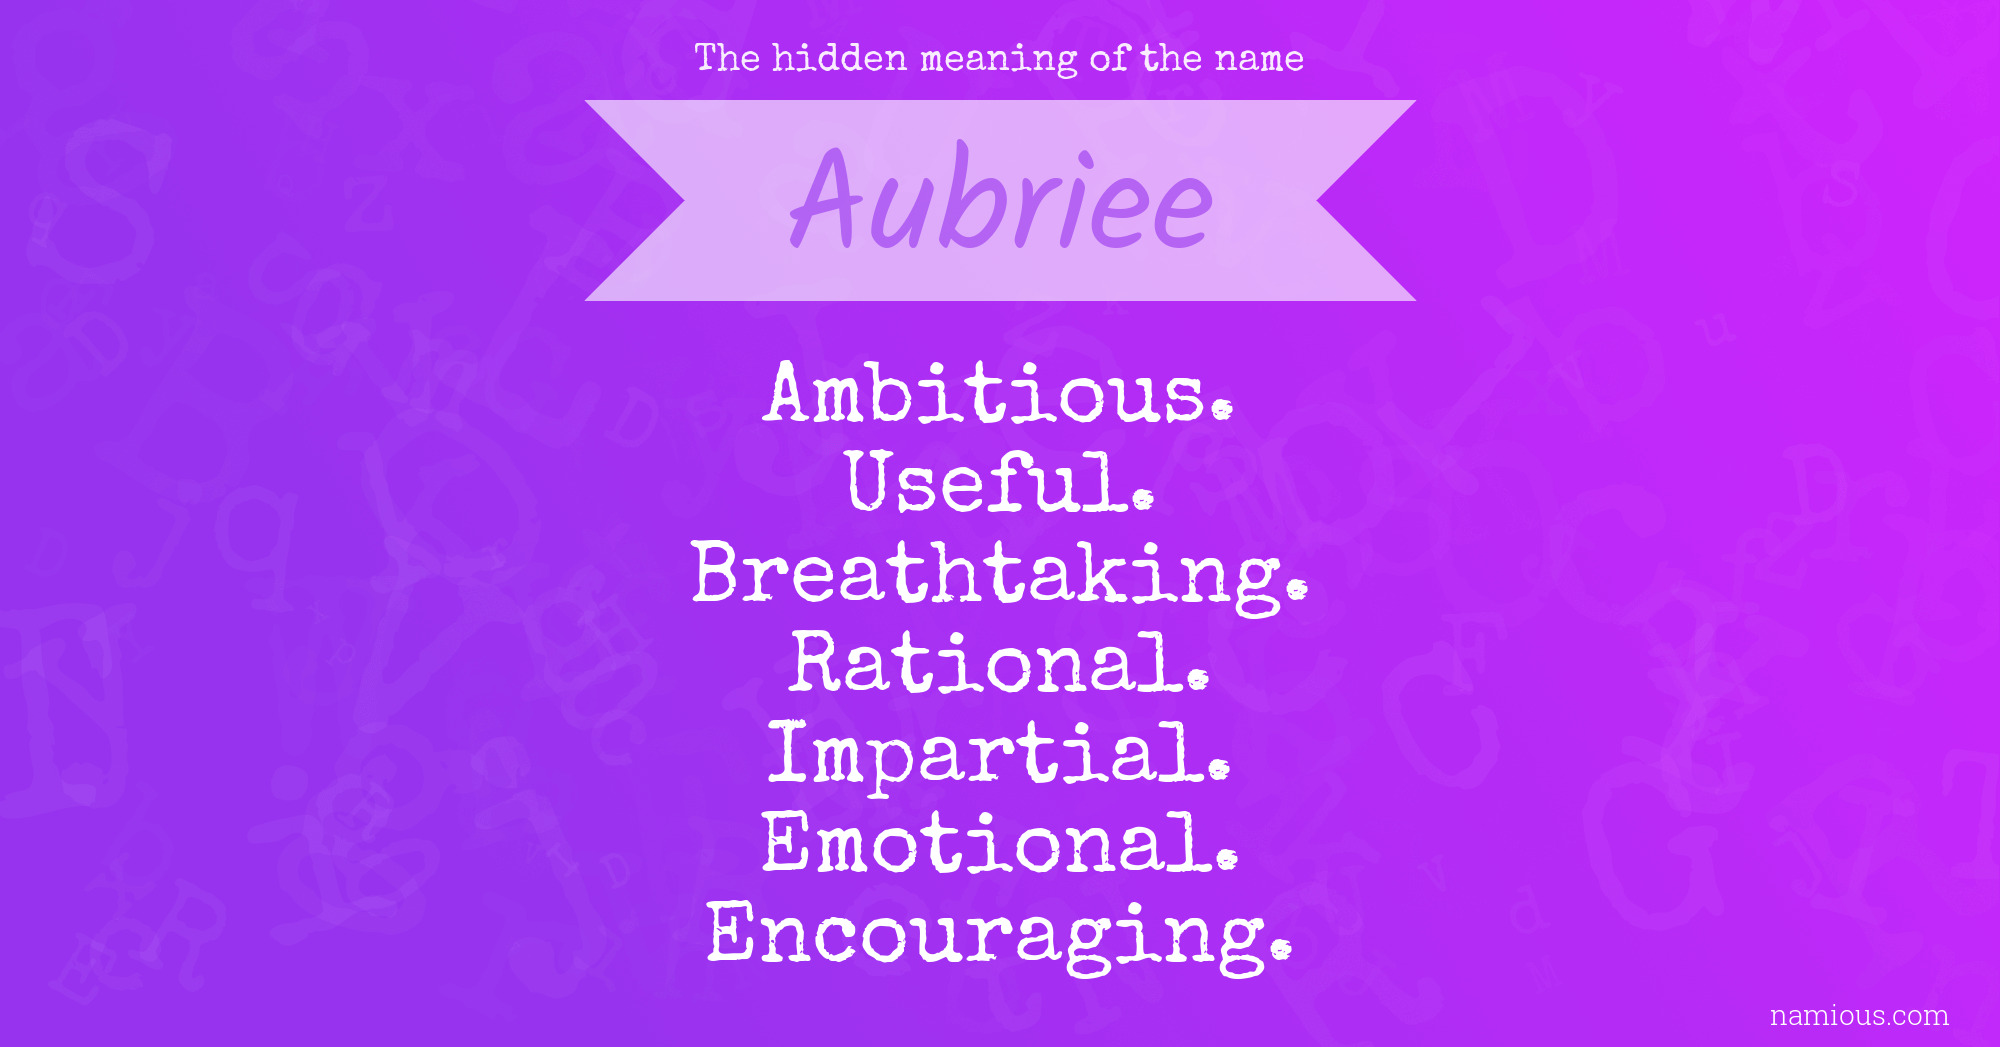 The hidden meaning of the name Aubriee